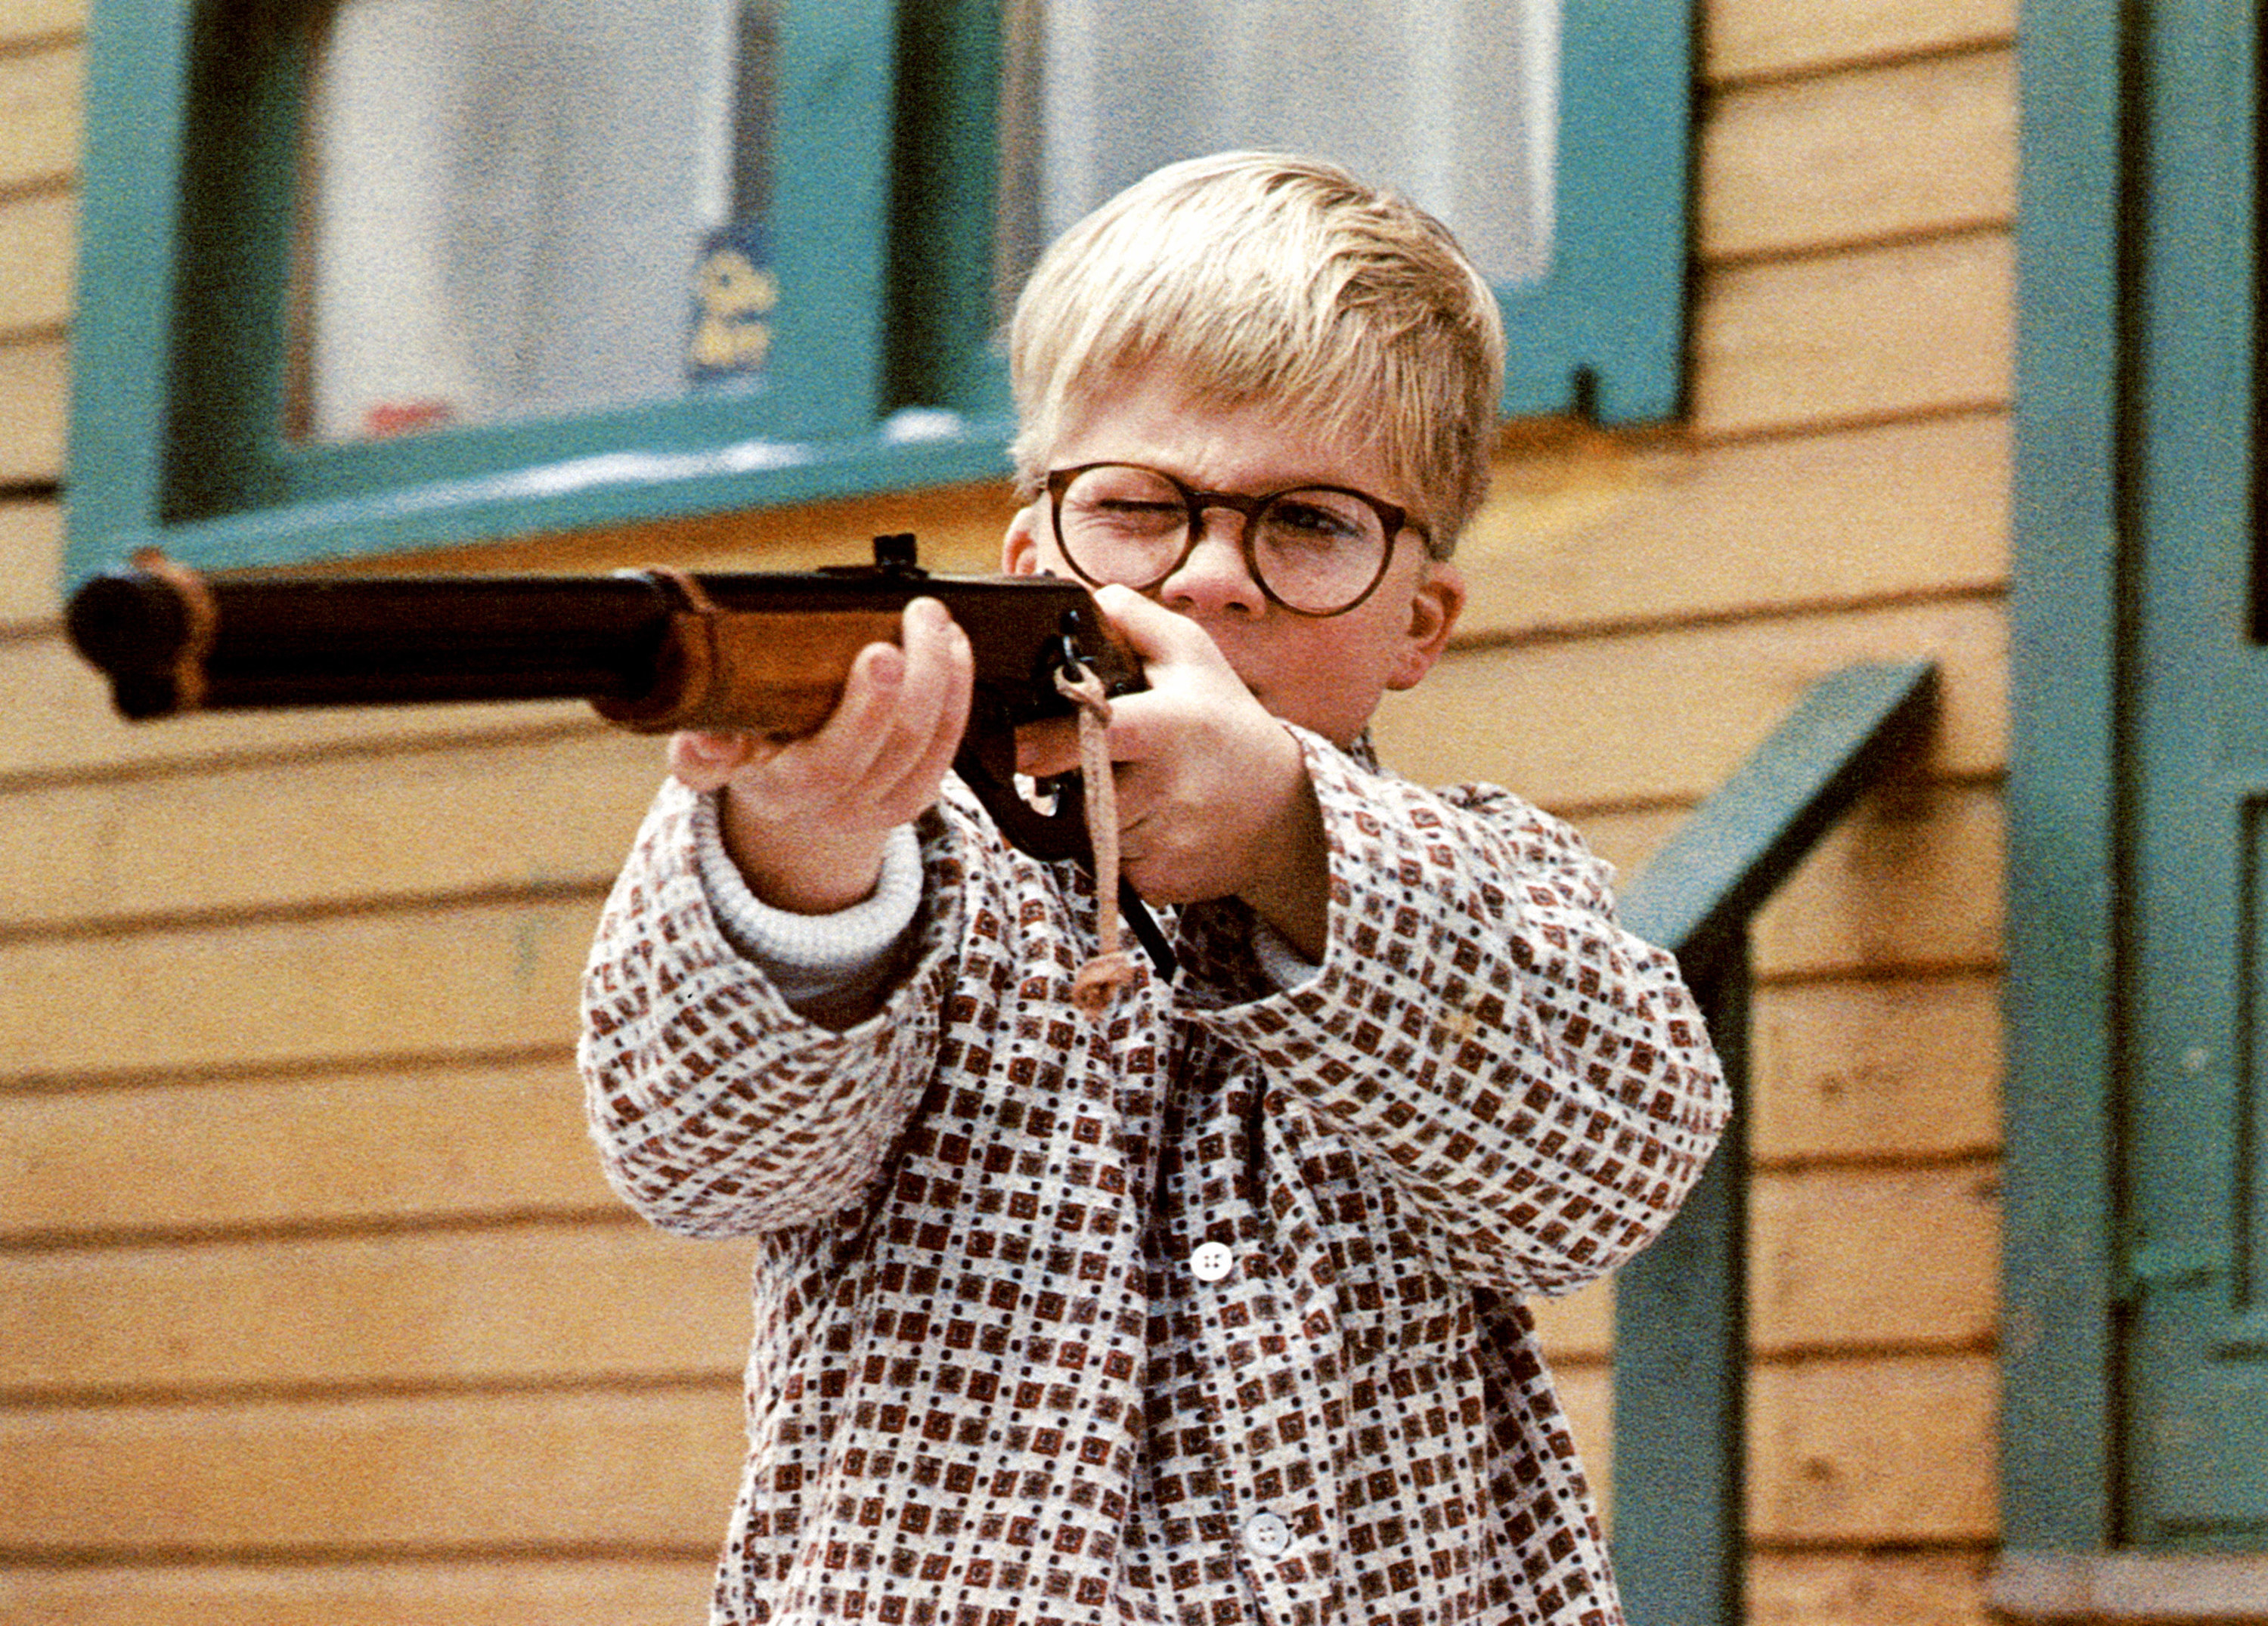 Peter Billingsley pointing a toy gun.